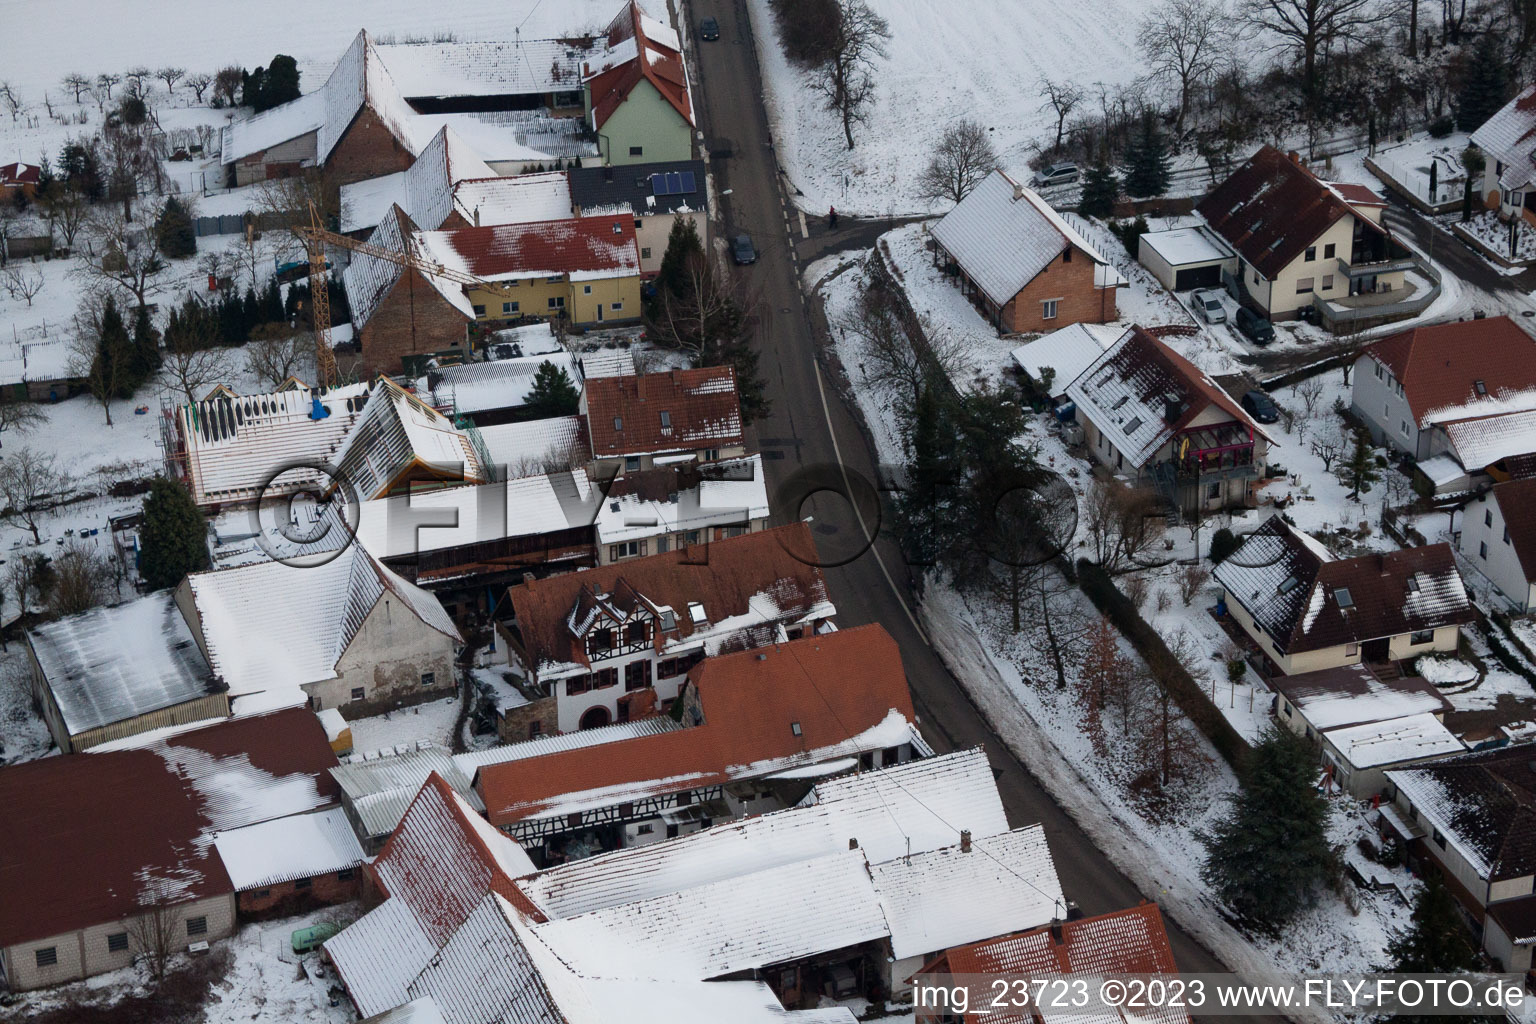 Hergersweiler in the state Rhineland-Palatinate, Germany from a drone